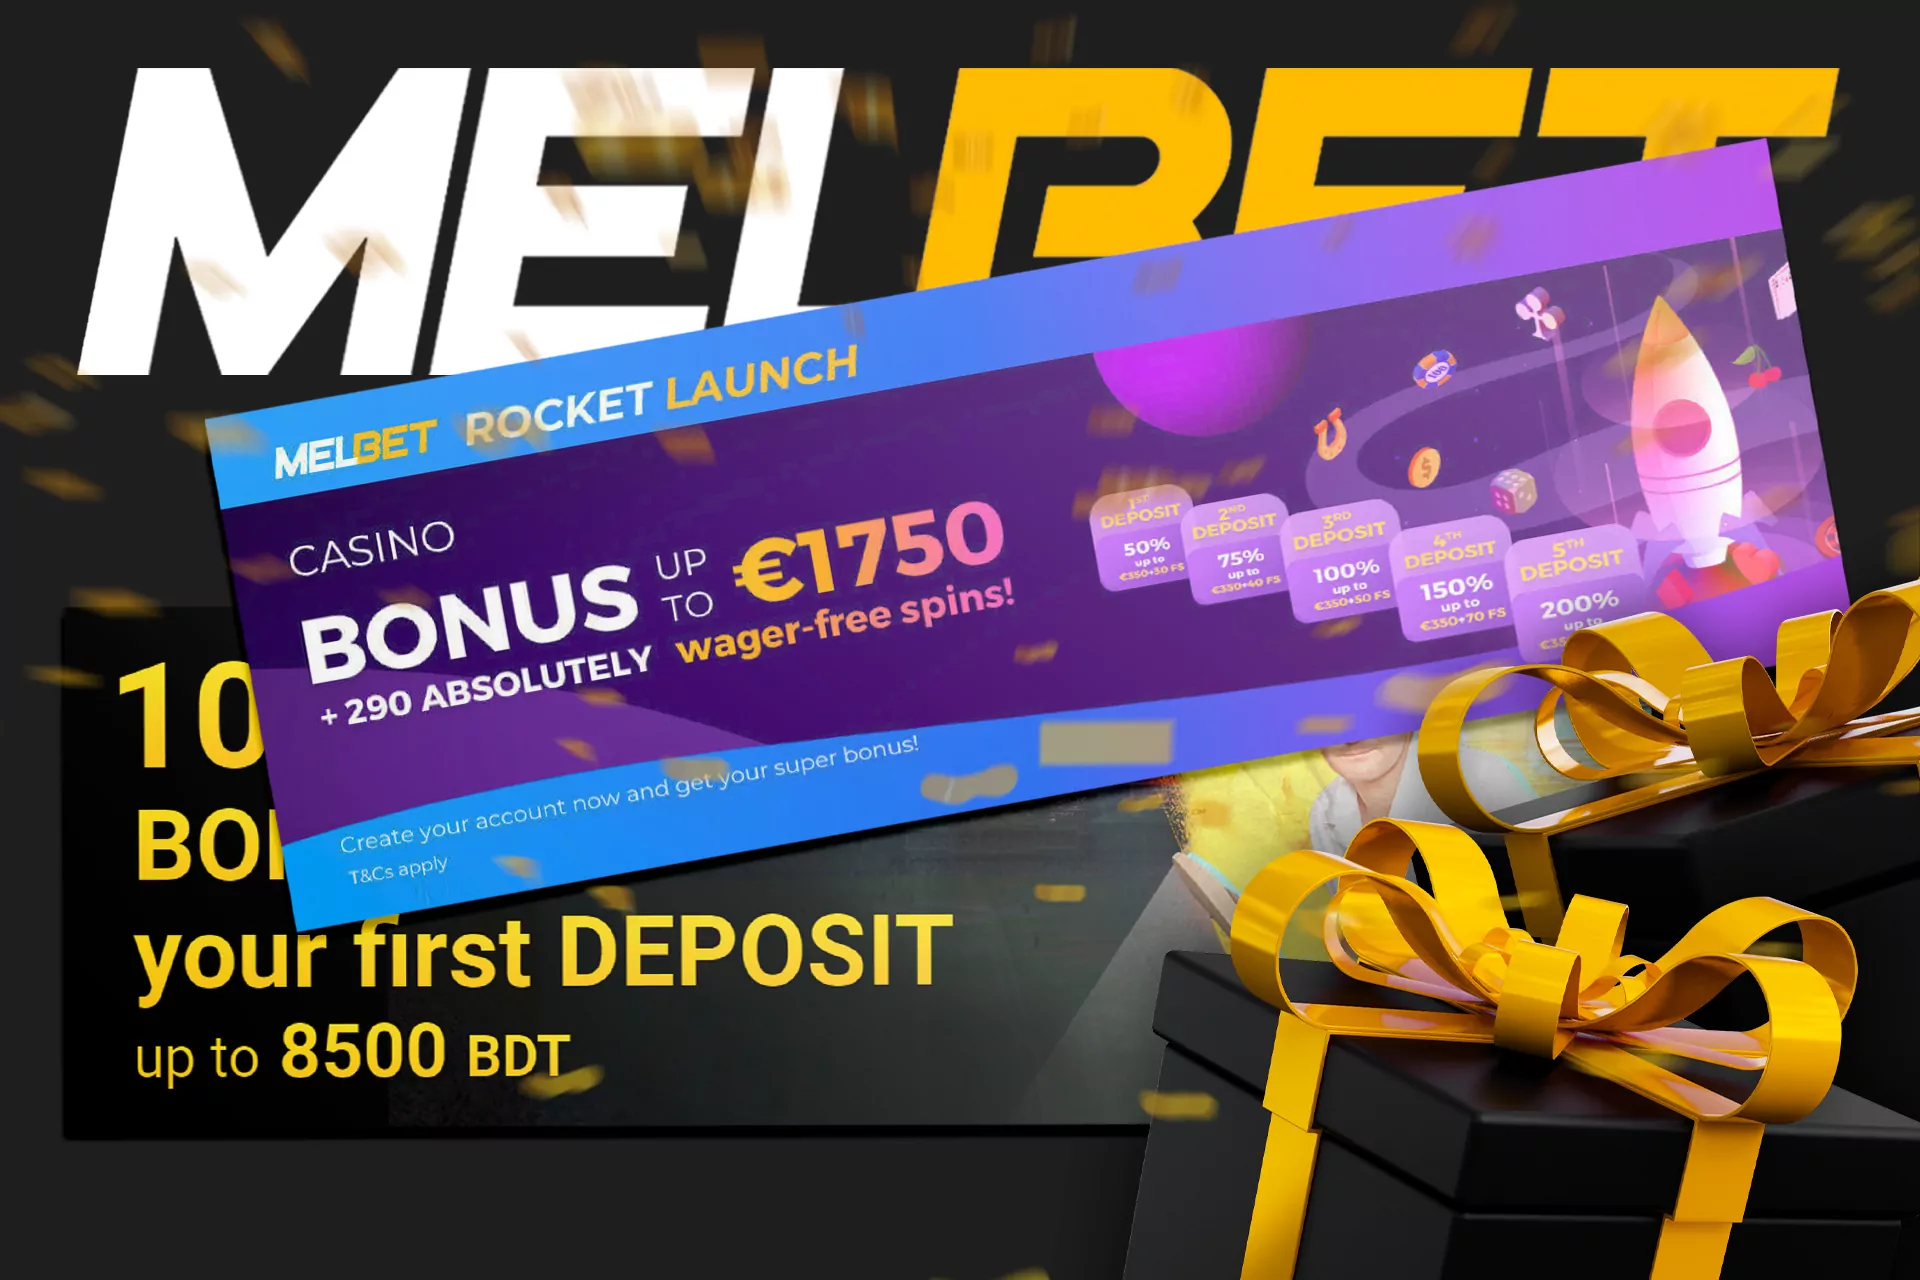 For new users, there are different bonus offers at Melbet for betting and playing casino games.